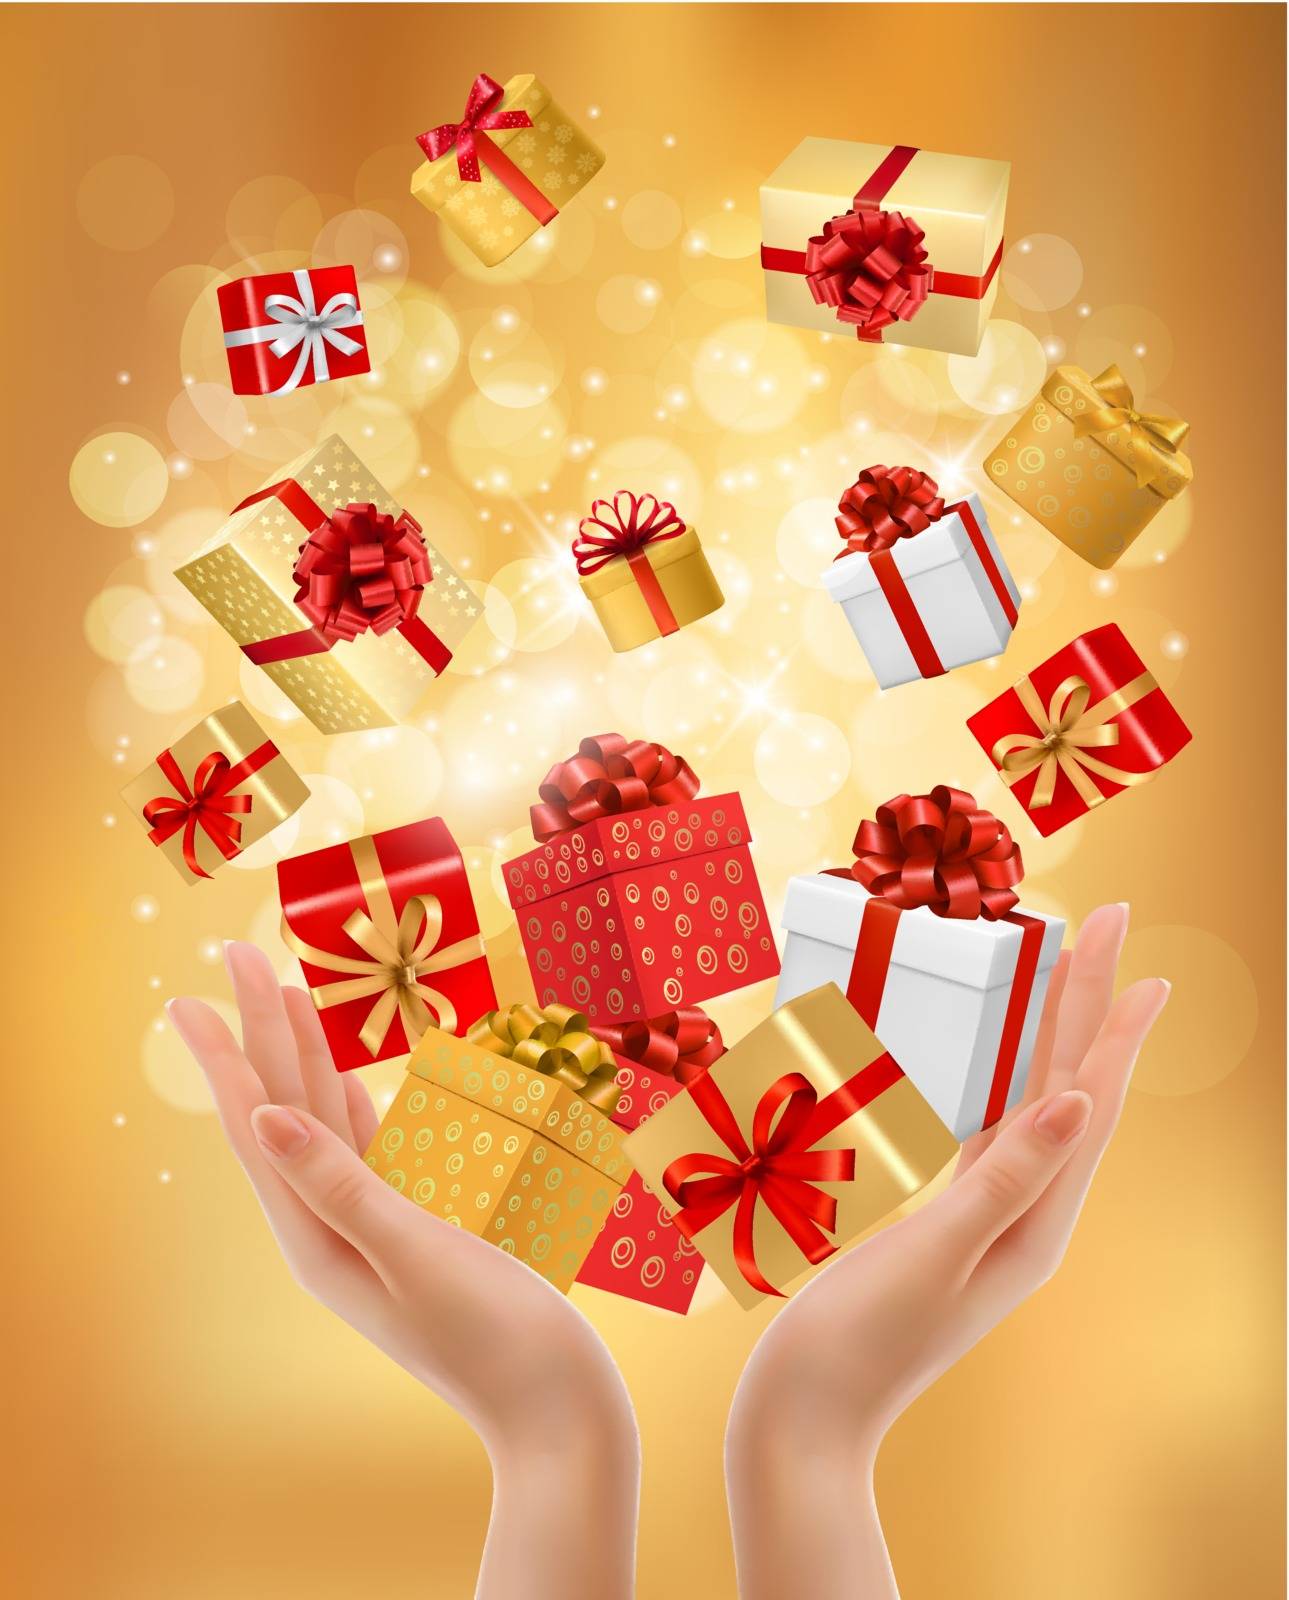 Holiday background with hands holding gift boxes. Concept of giv by ecco